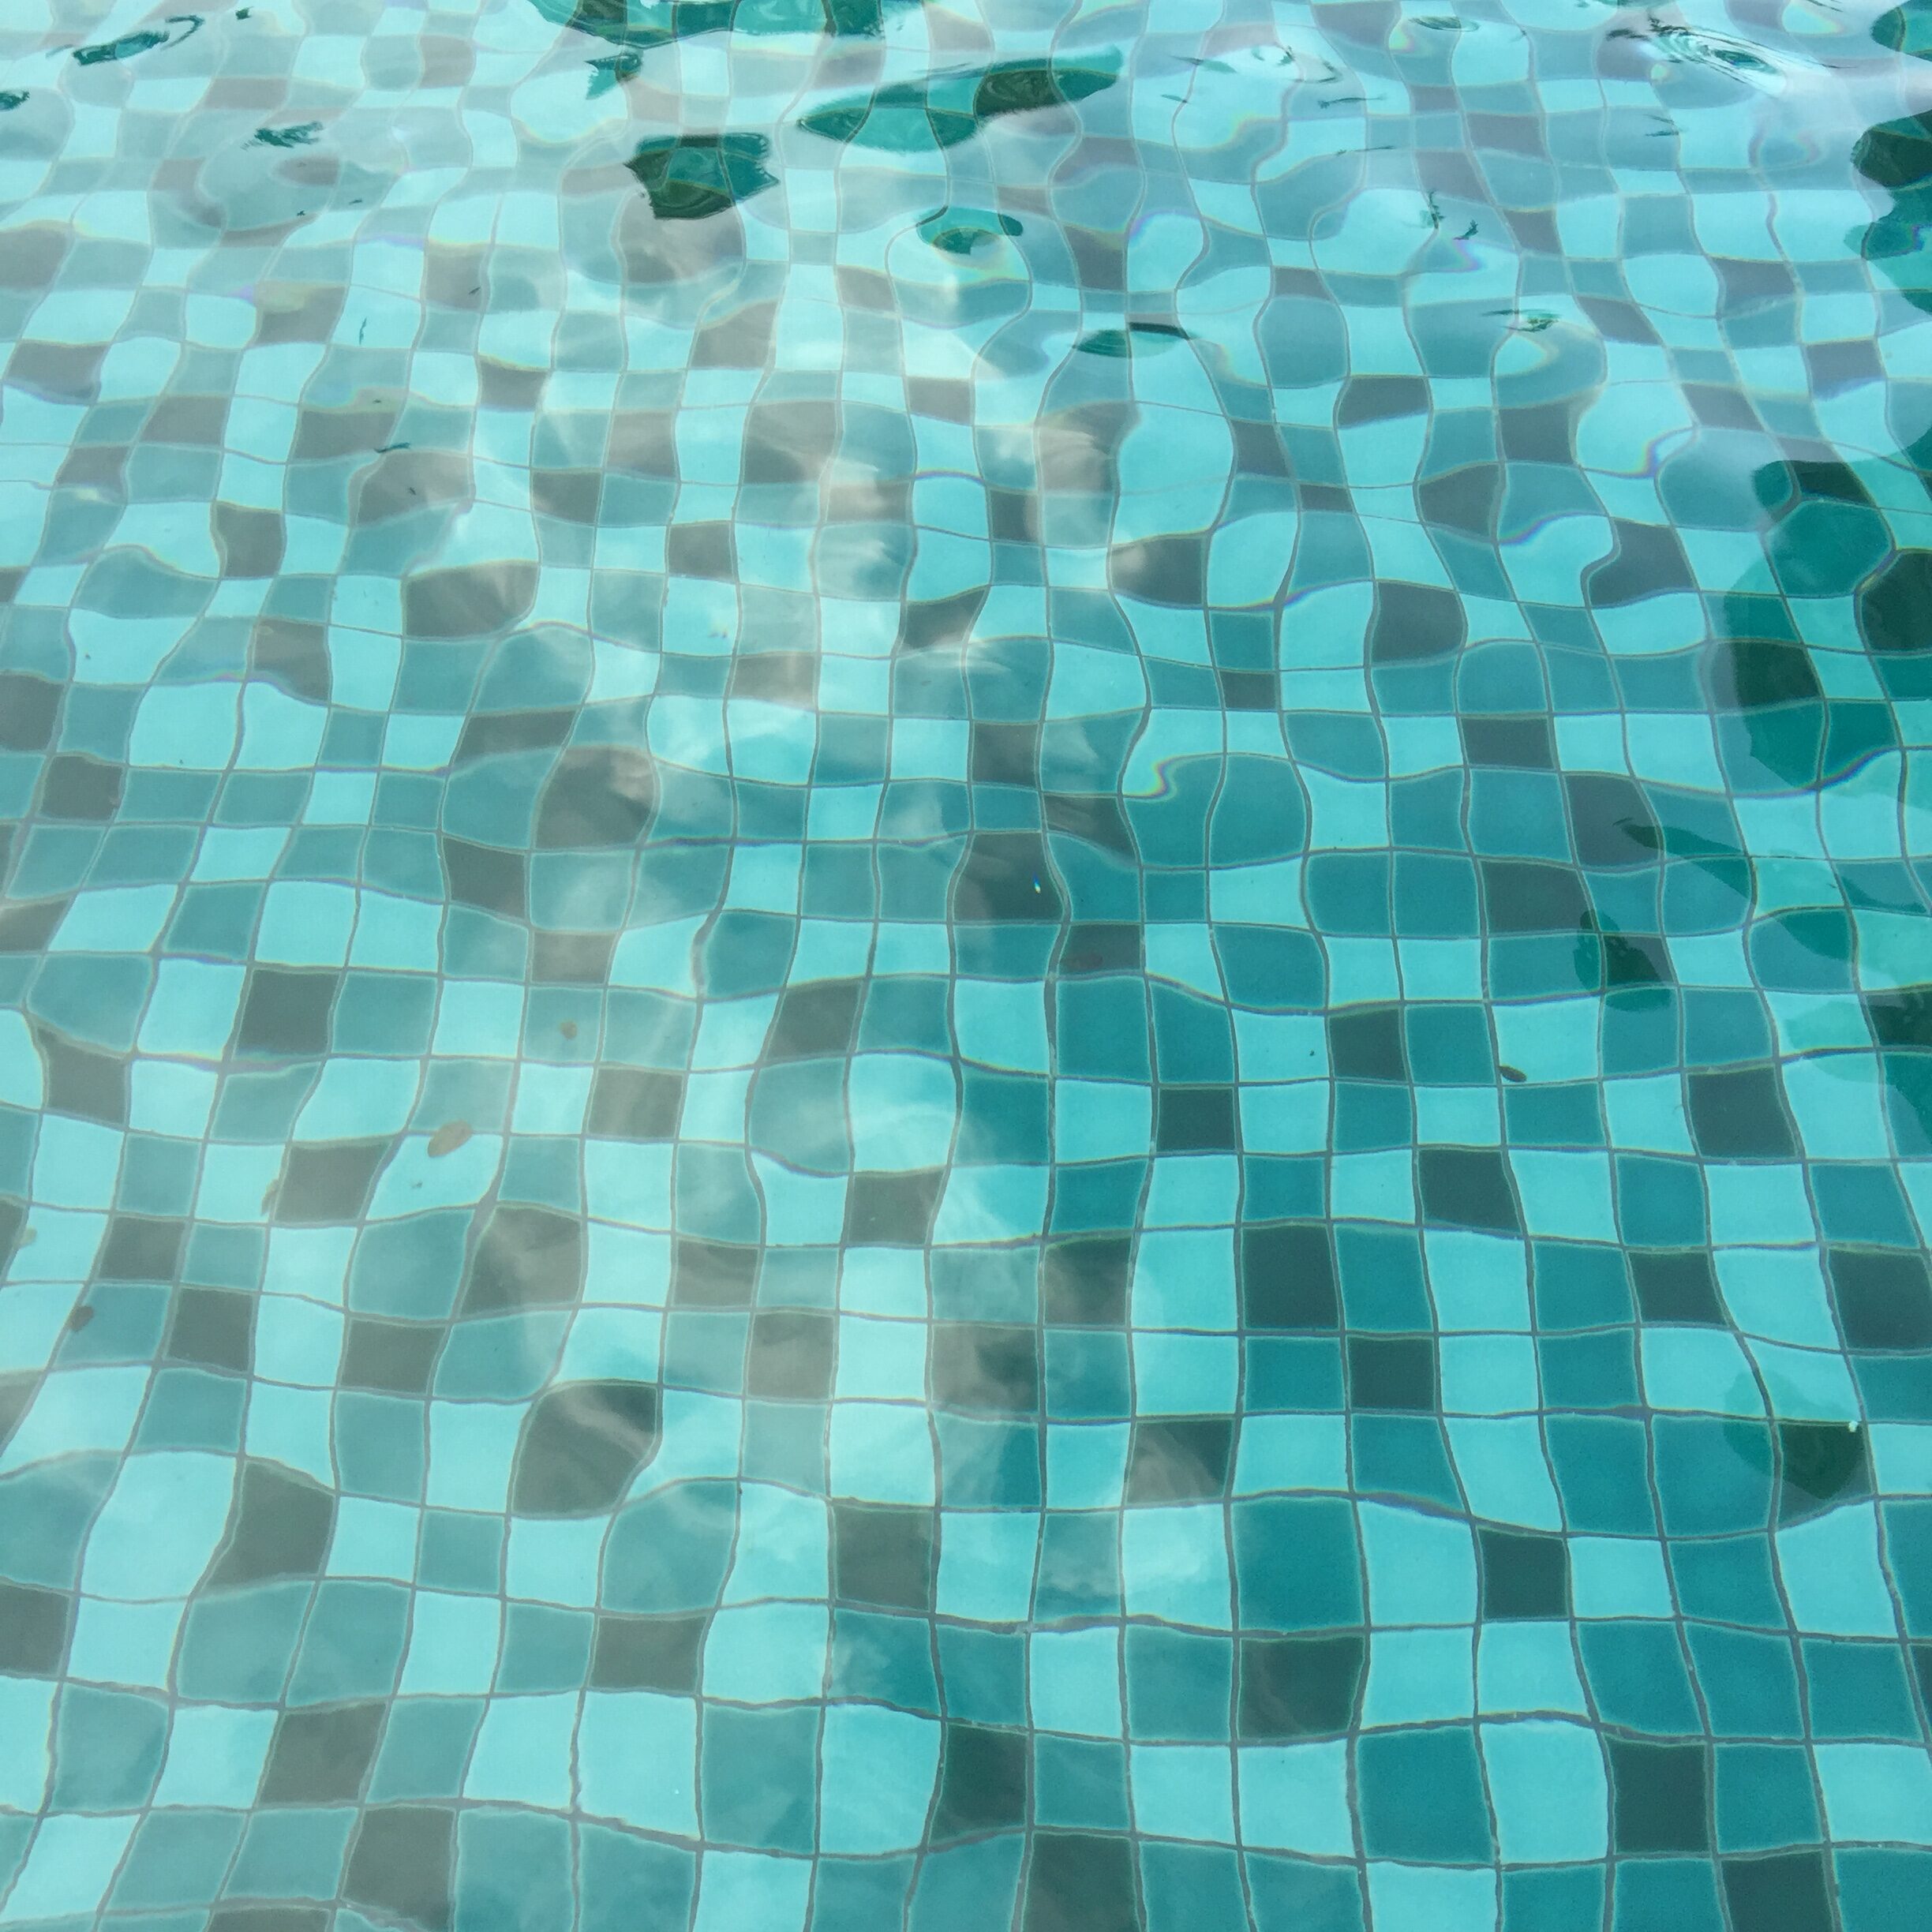 Pool tiles reflecting the shimmering water, adding to the aesthetic appeal of the pool.